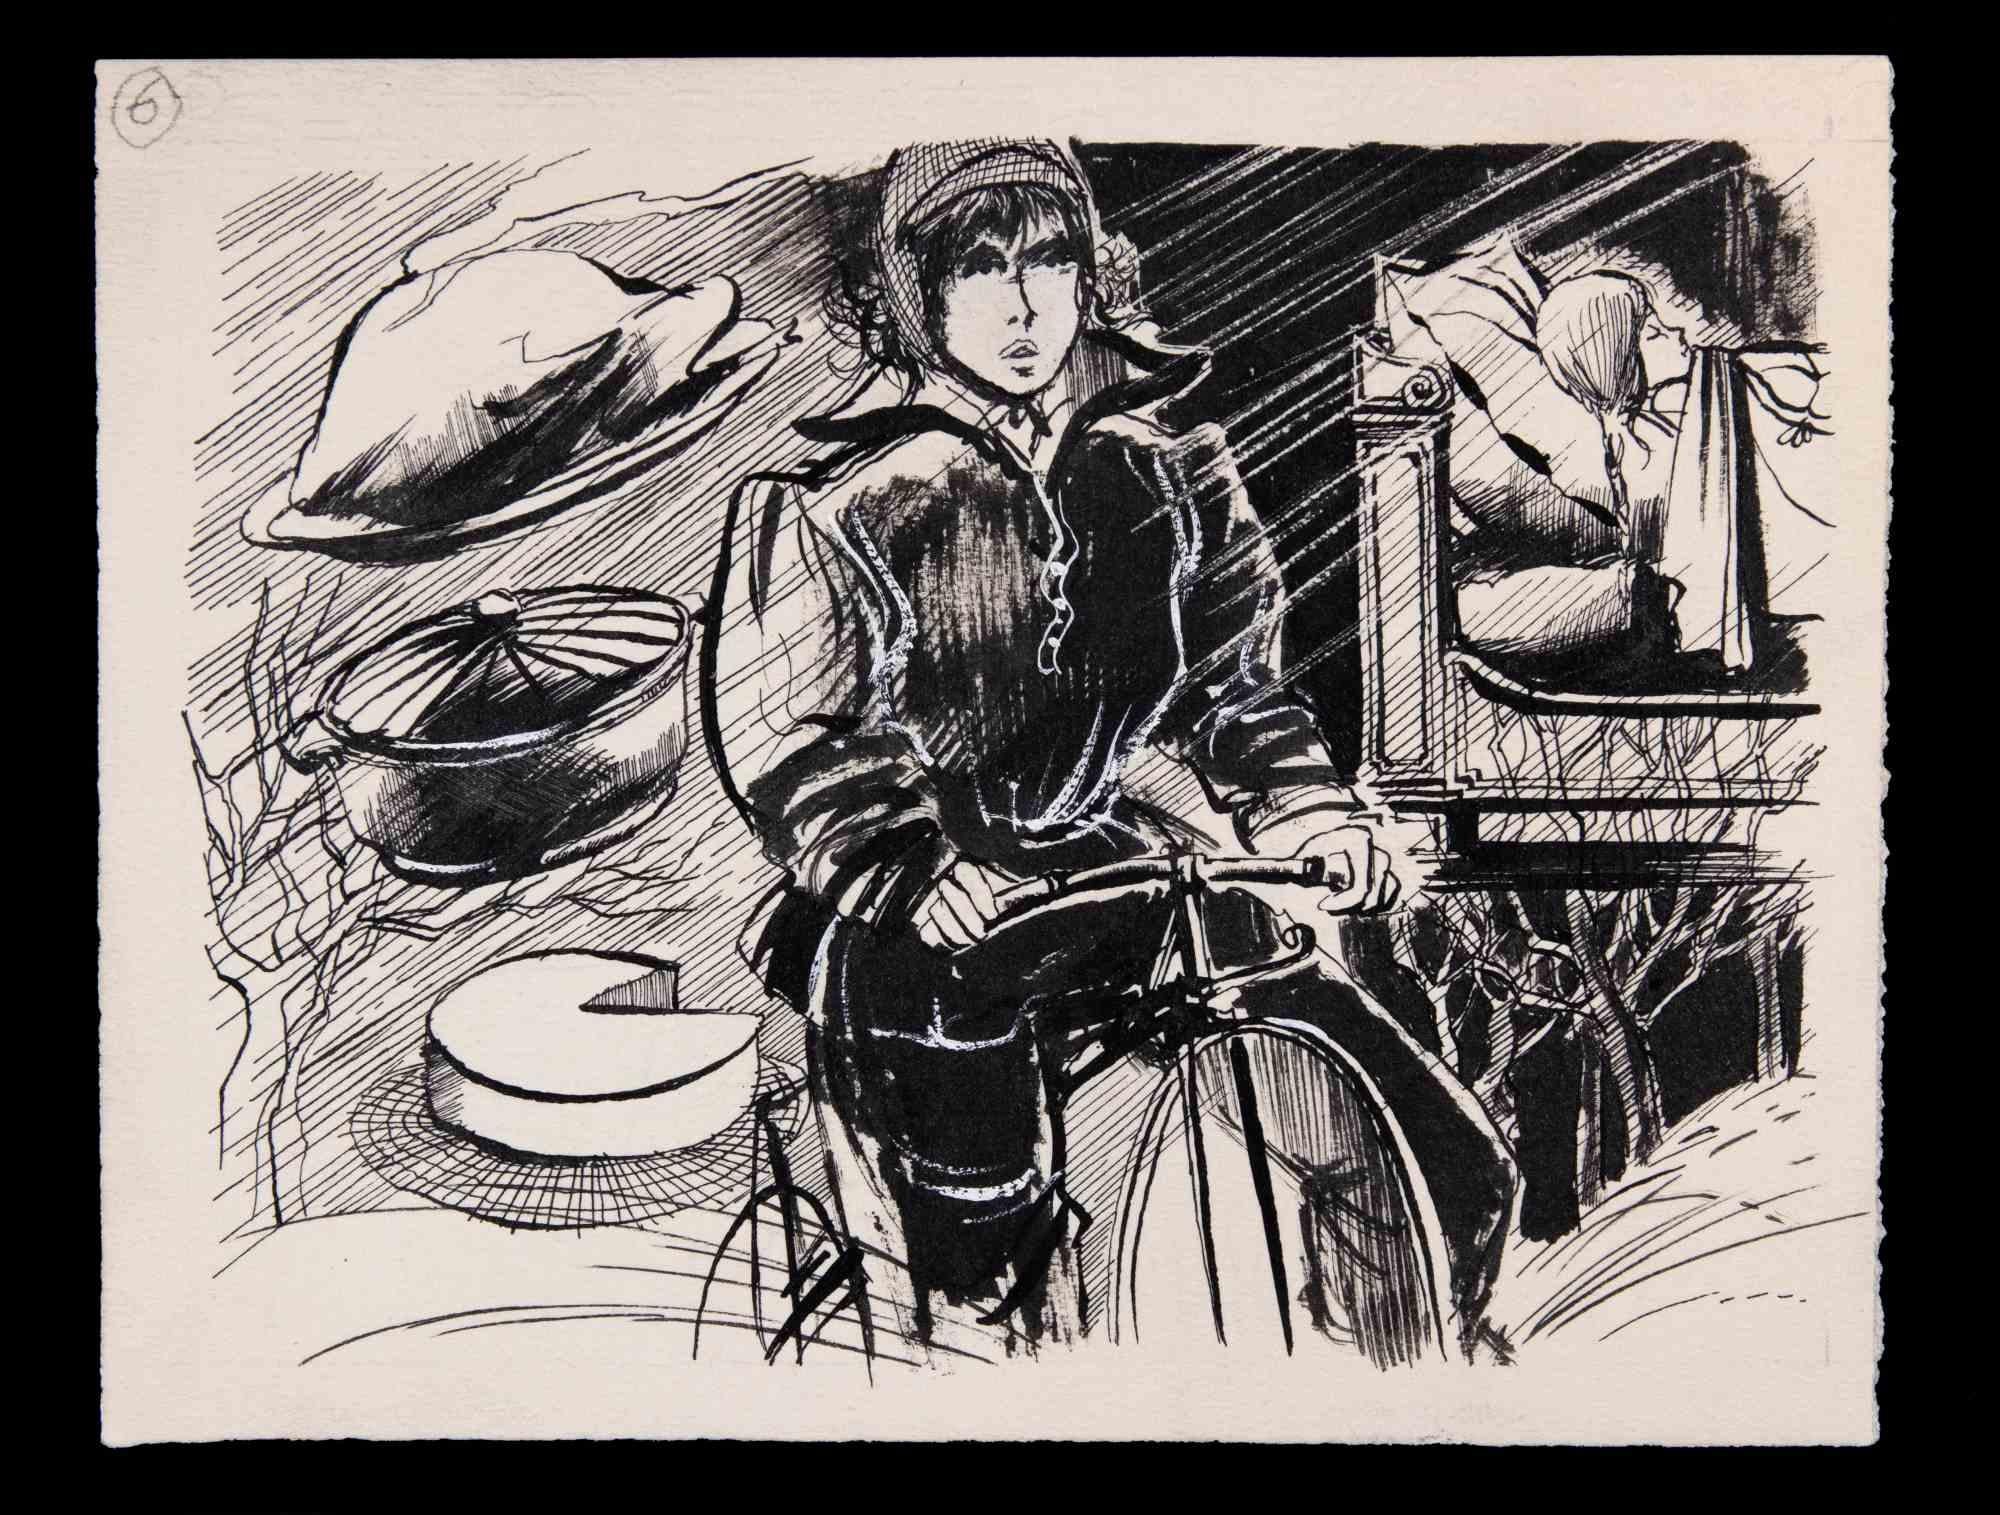 Bike Woman is an original China Ink Drawing realized by Norbert Meyre.

The little artwork on a yellowed paper is in good condition.

No Signature.

Norbert Meyre is a French Illustrator of 20th century.